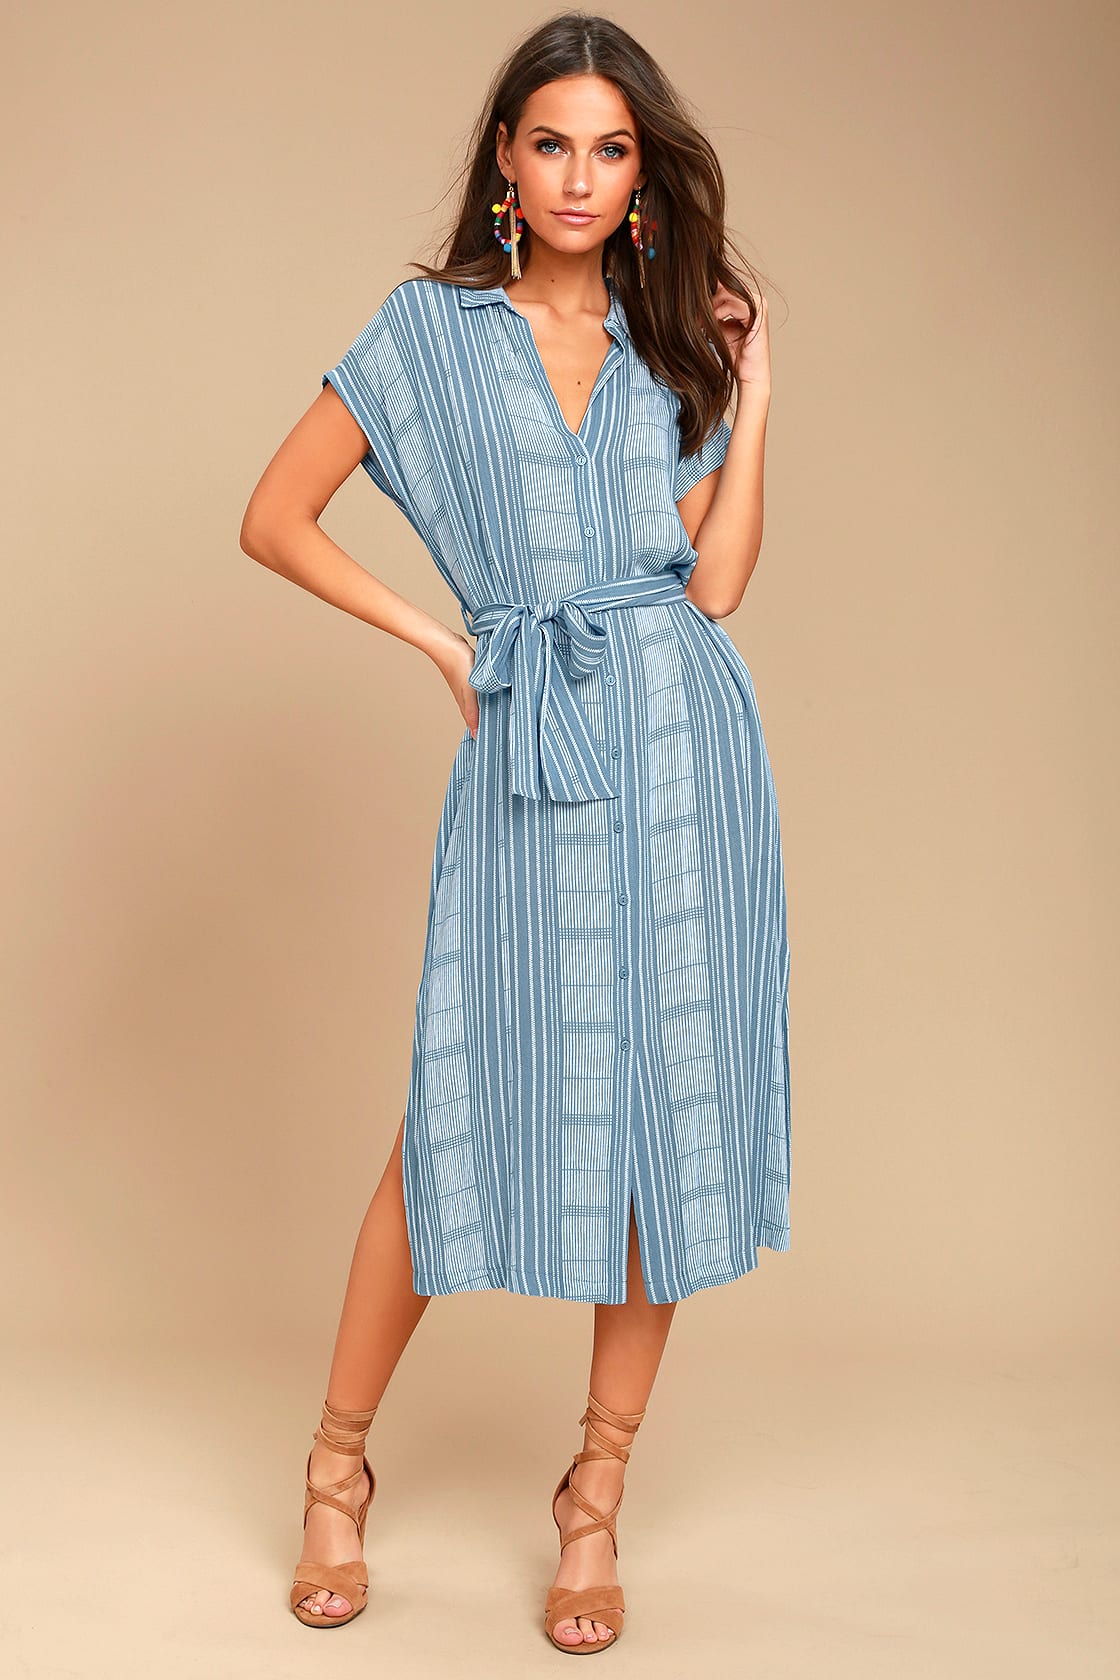 Blue Striped Shirt Dress for Greek Vacation Outfit